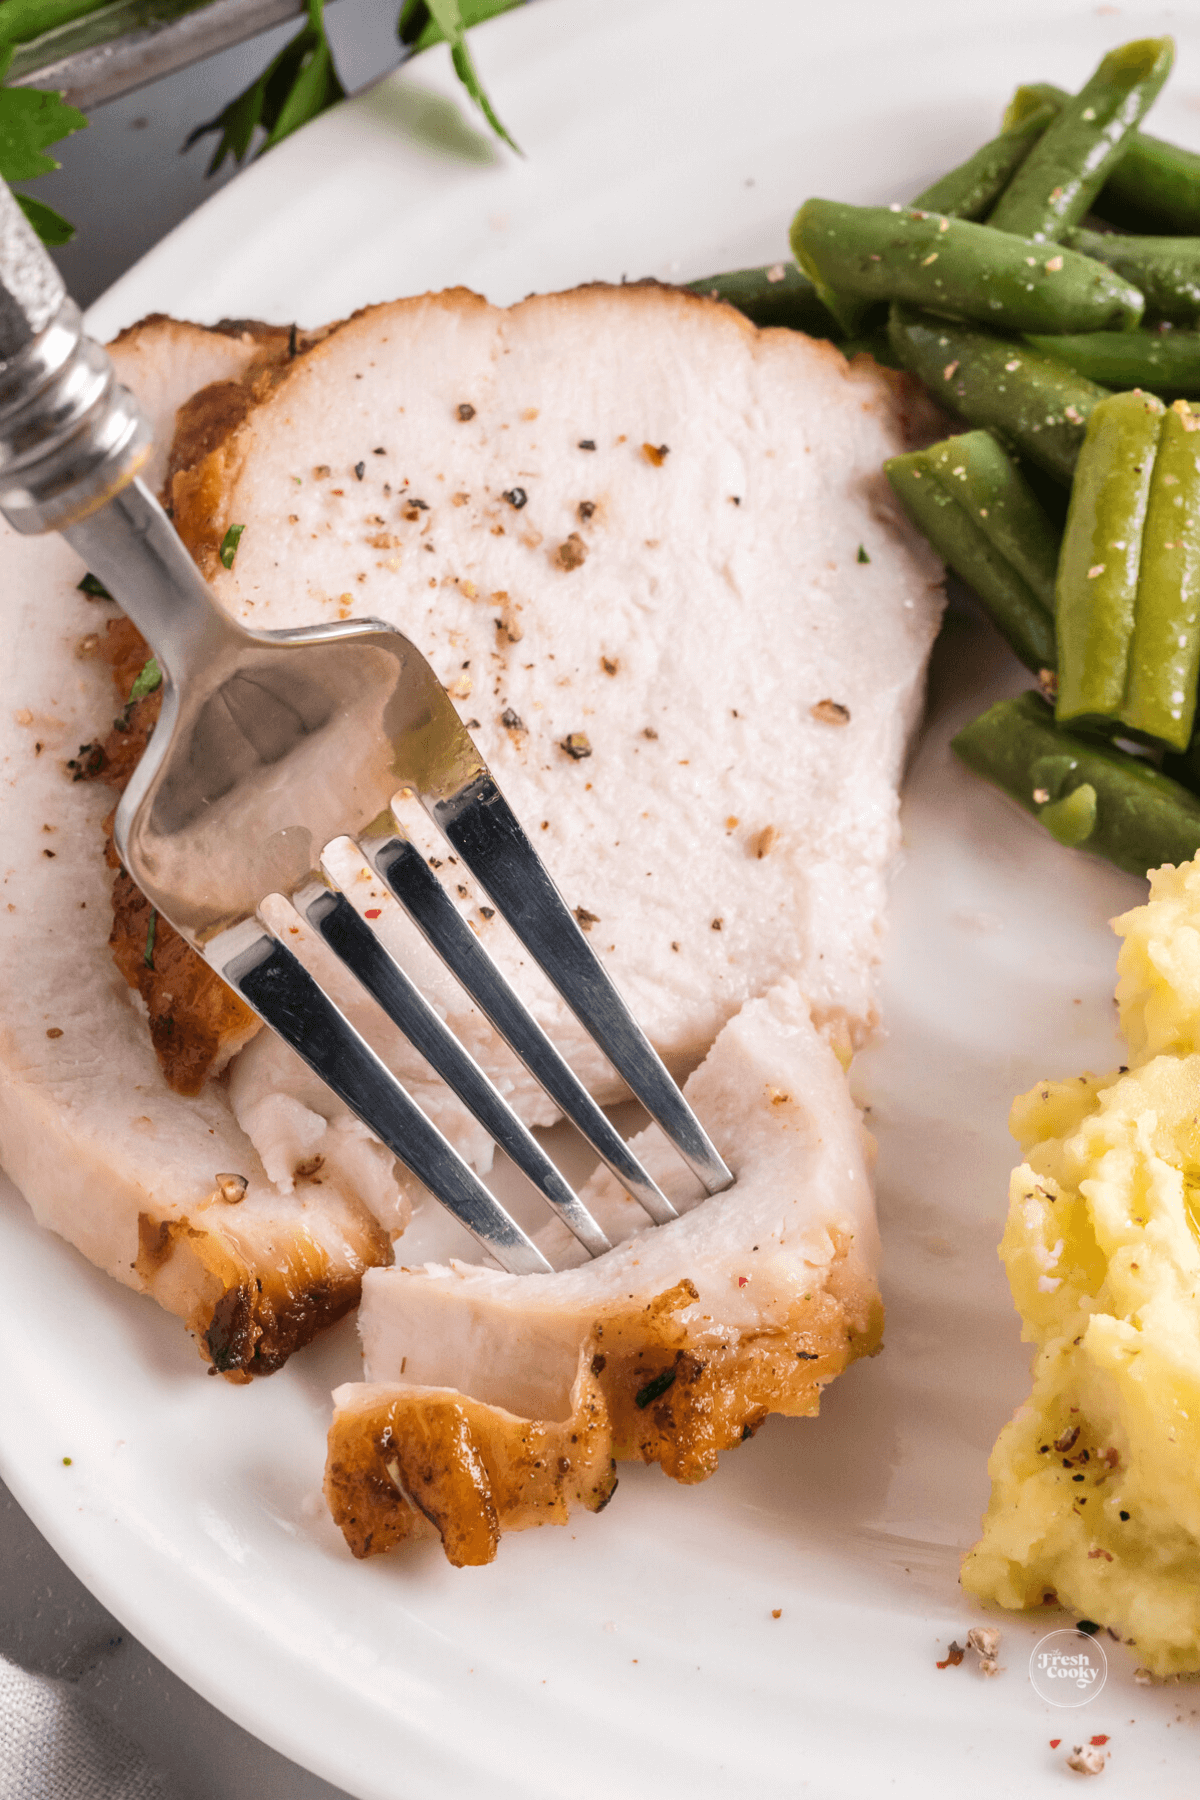 Tender turkey breast on plate with fork taking a bite.